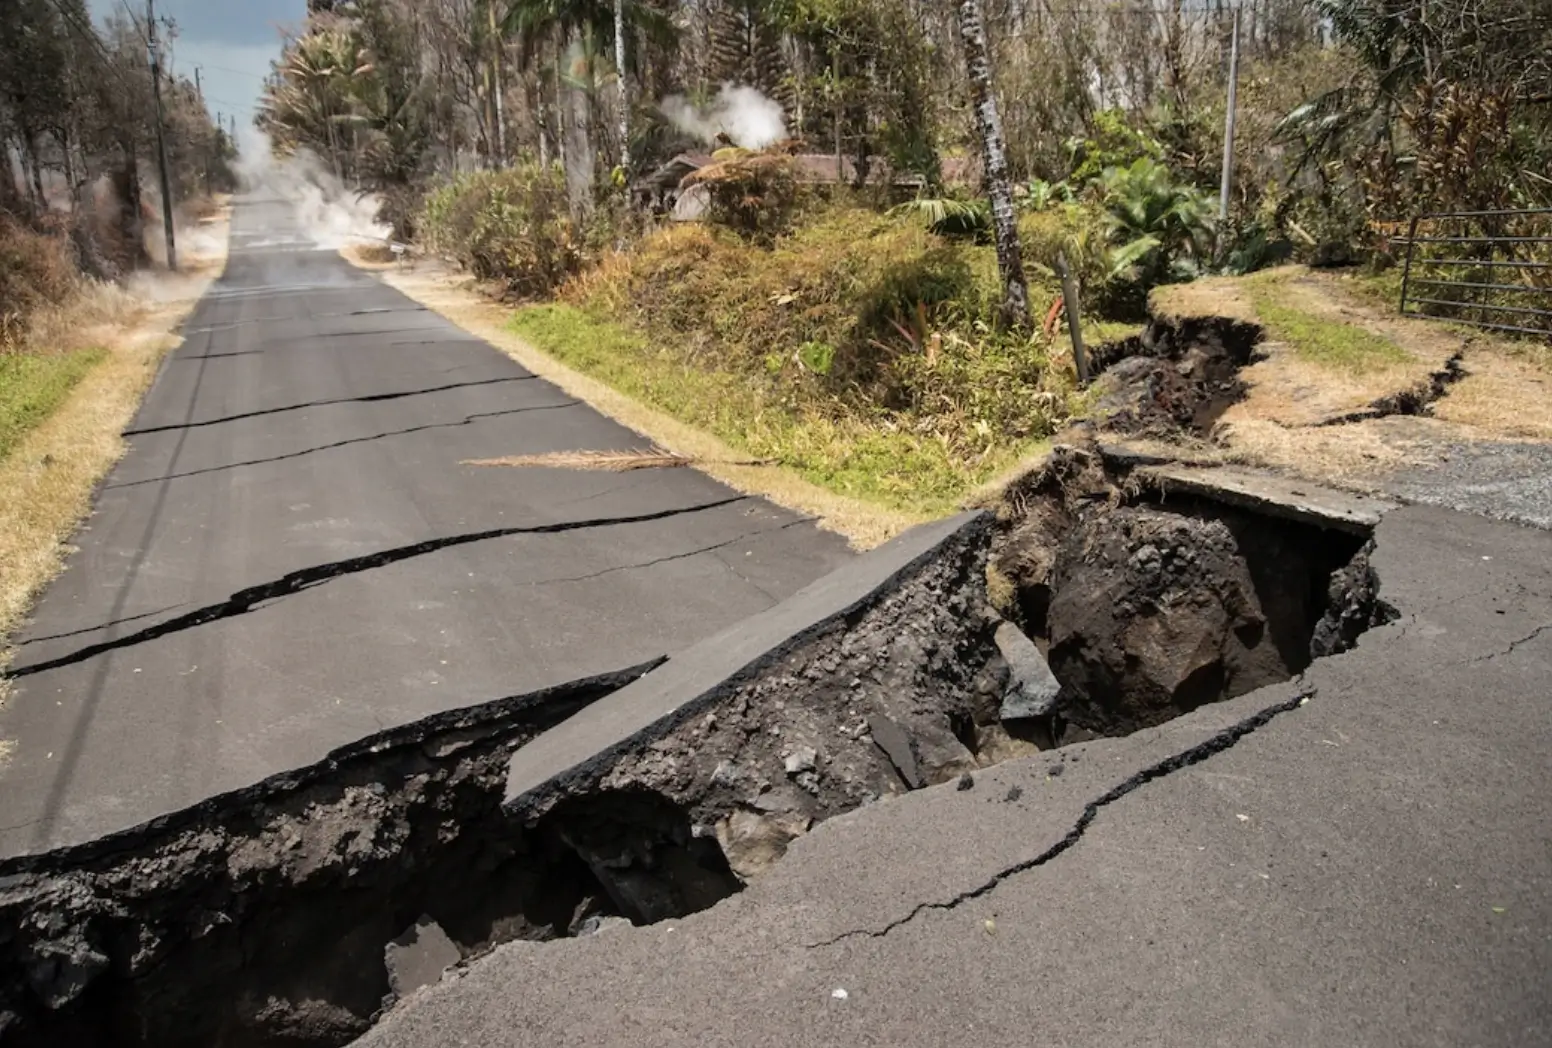 Emergency response teams provide assistance to residents following the earthquake on the Big Island of Hawaii, showcasing swift and coordinated efforts in times of crisis.